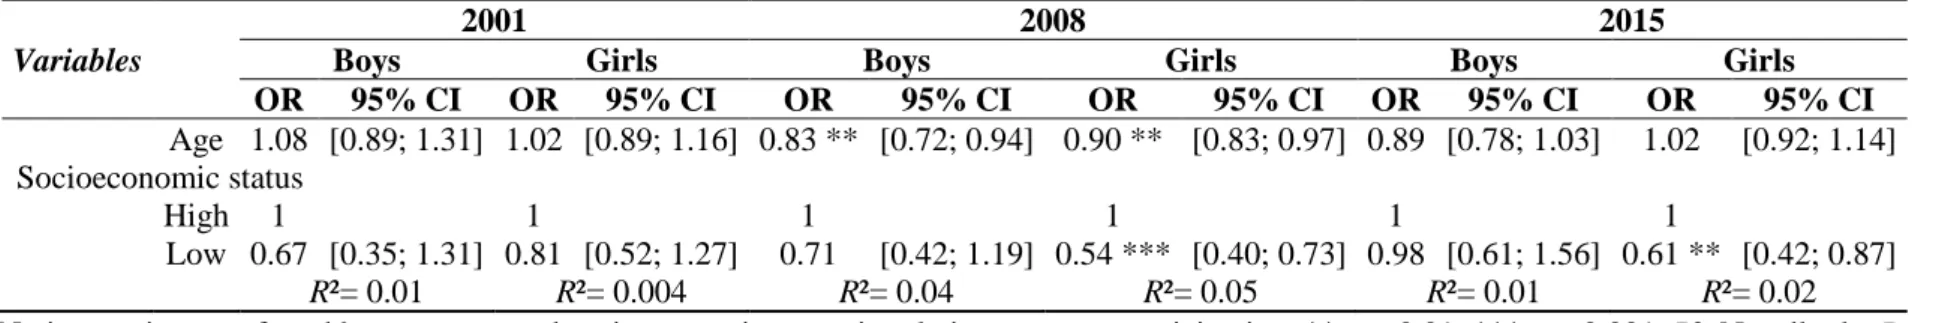 Table 2. Odds ratio (OR) and 95% confidence interval (CI) describing the relationship between sport participation and socioeconomic status by  sex and year, adjusted for age